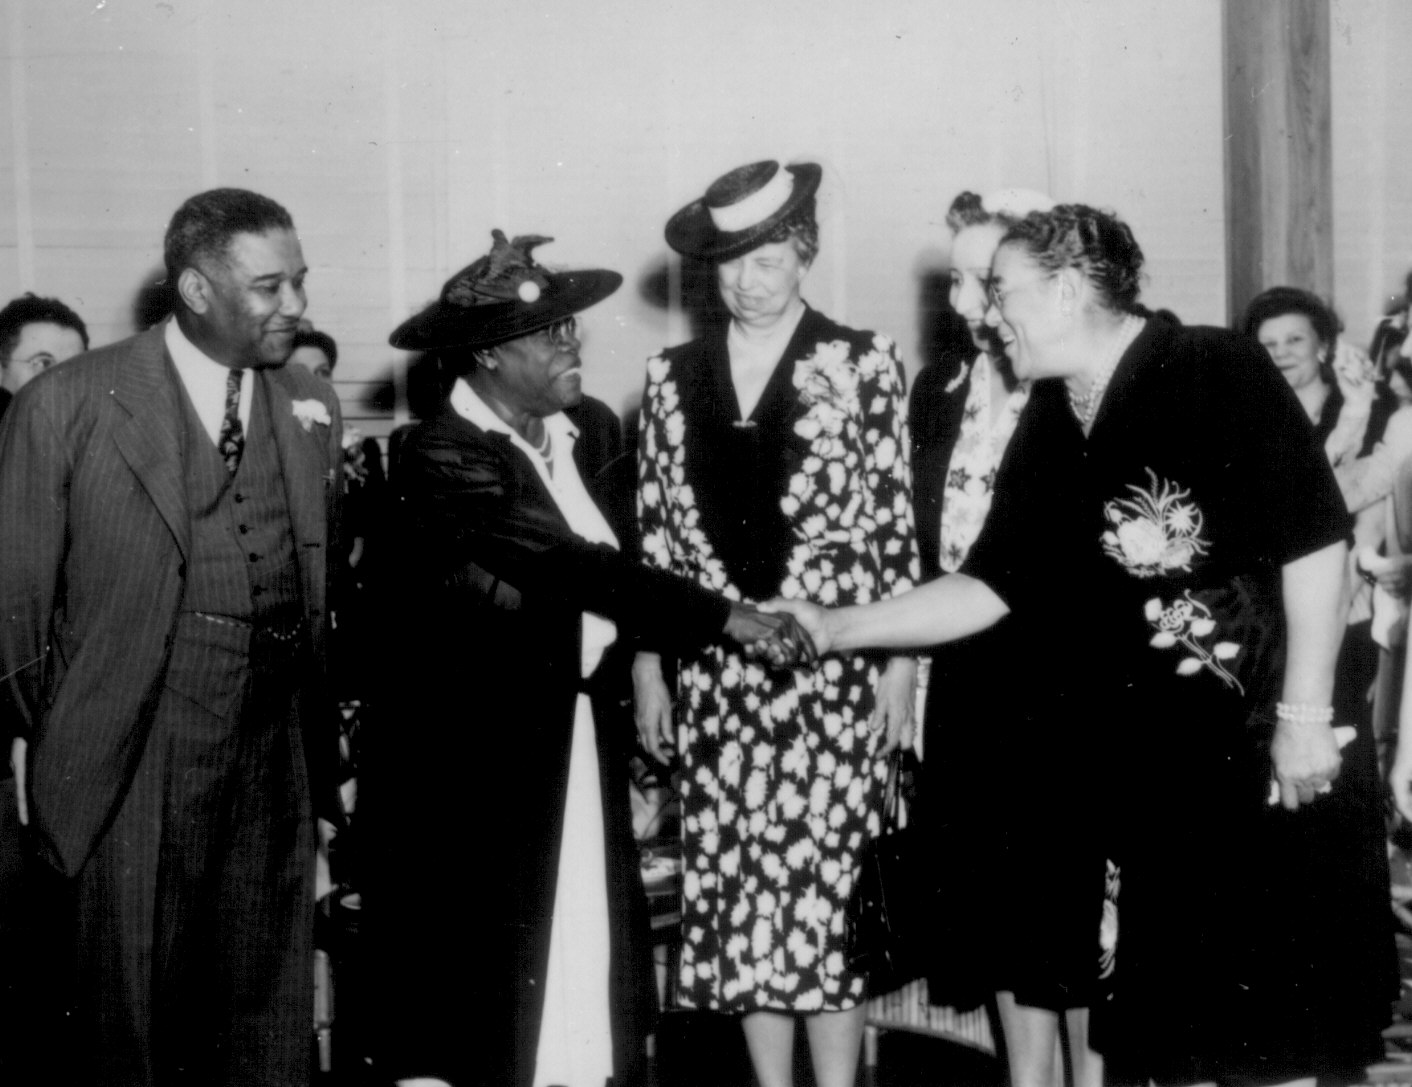 Mrs. Eleanor Roosevelt at the opening of Midway Hall, Washington, DC, United States, May 1943; the hall was built by Public Buildings Administration of FWA for African-American female gov't workers